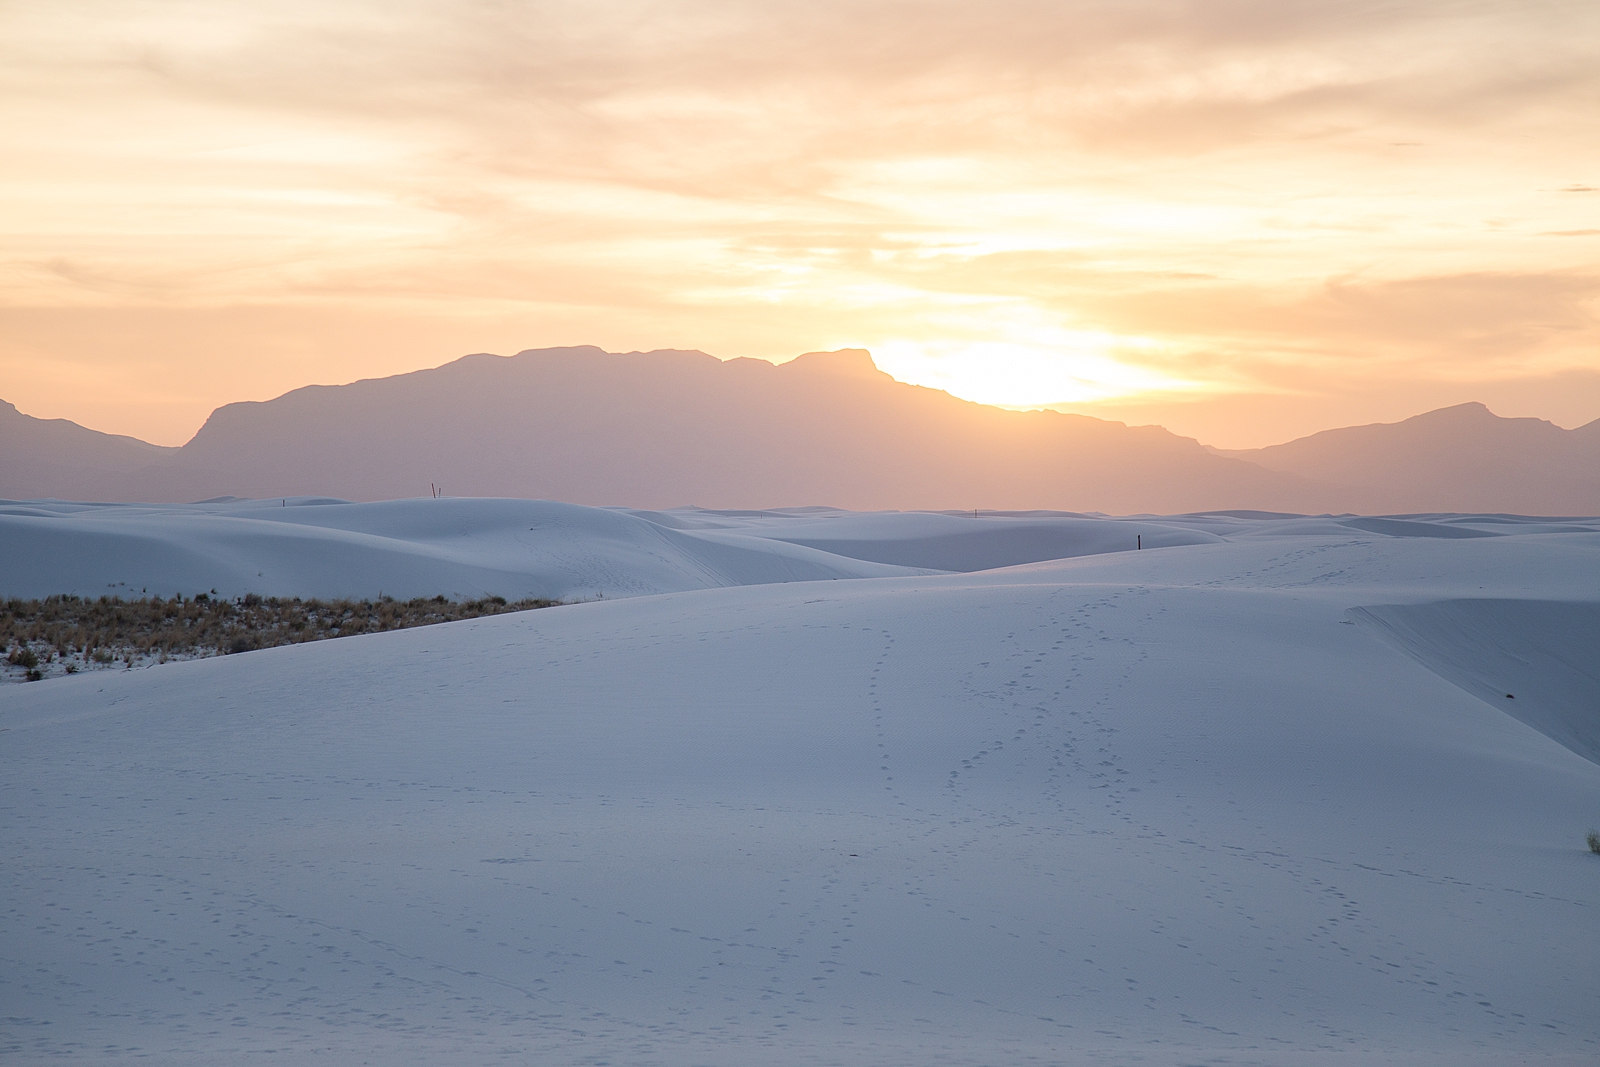 Sunset at White Sands National Park in New Mexico